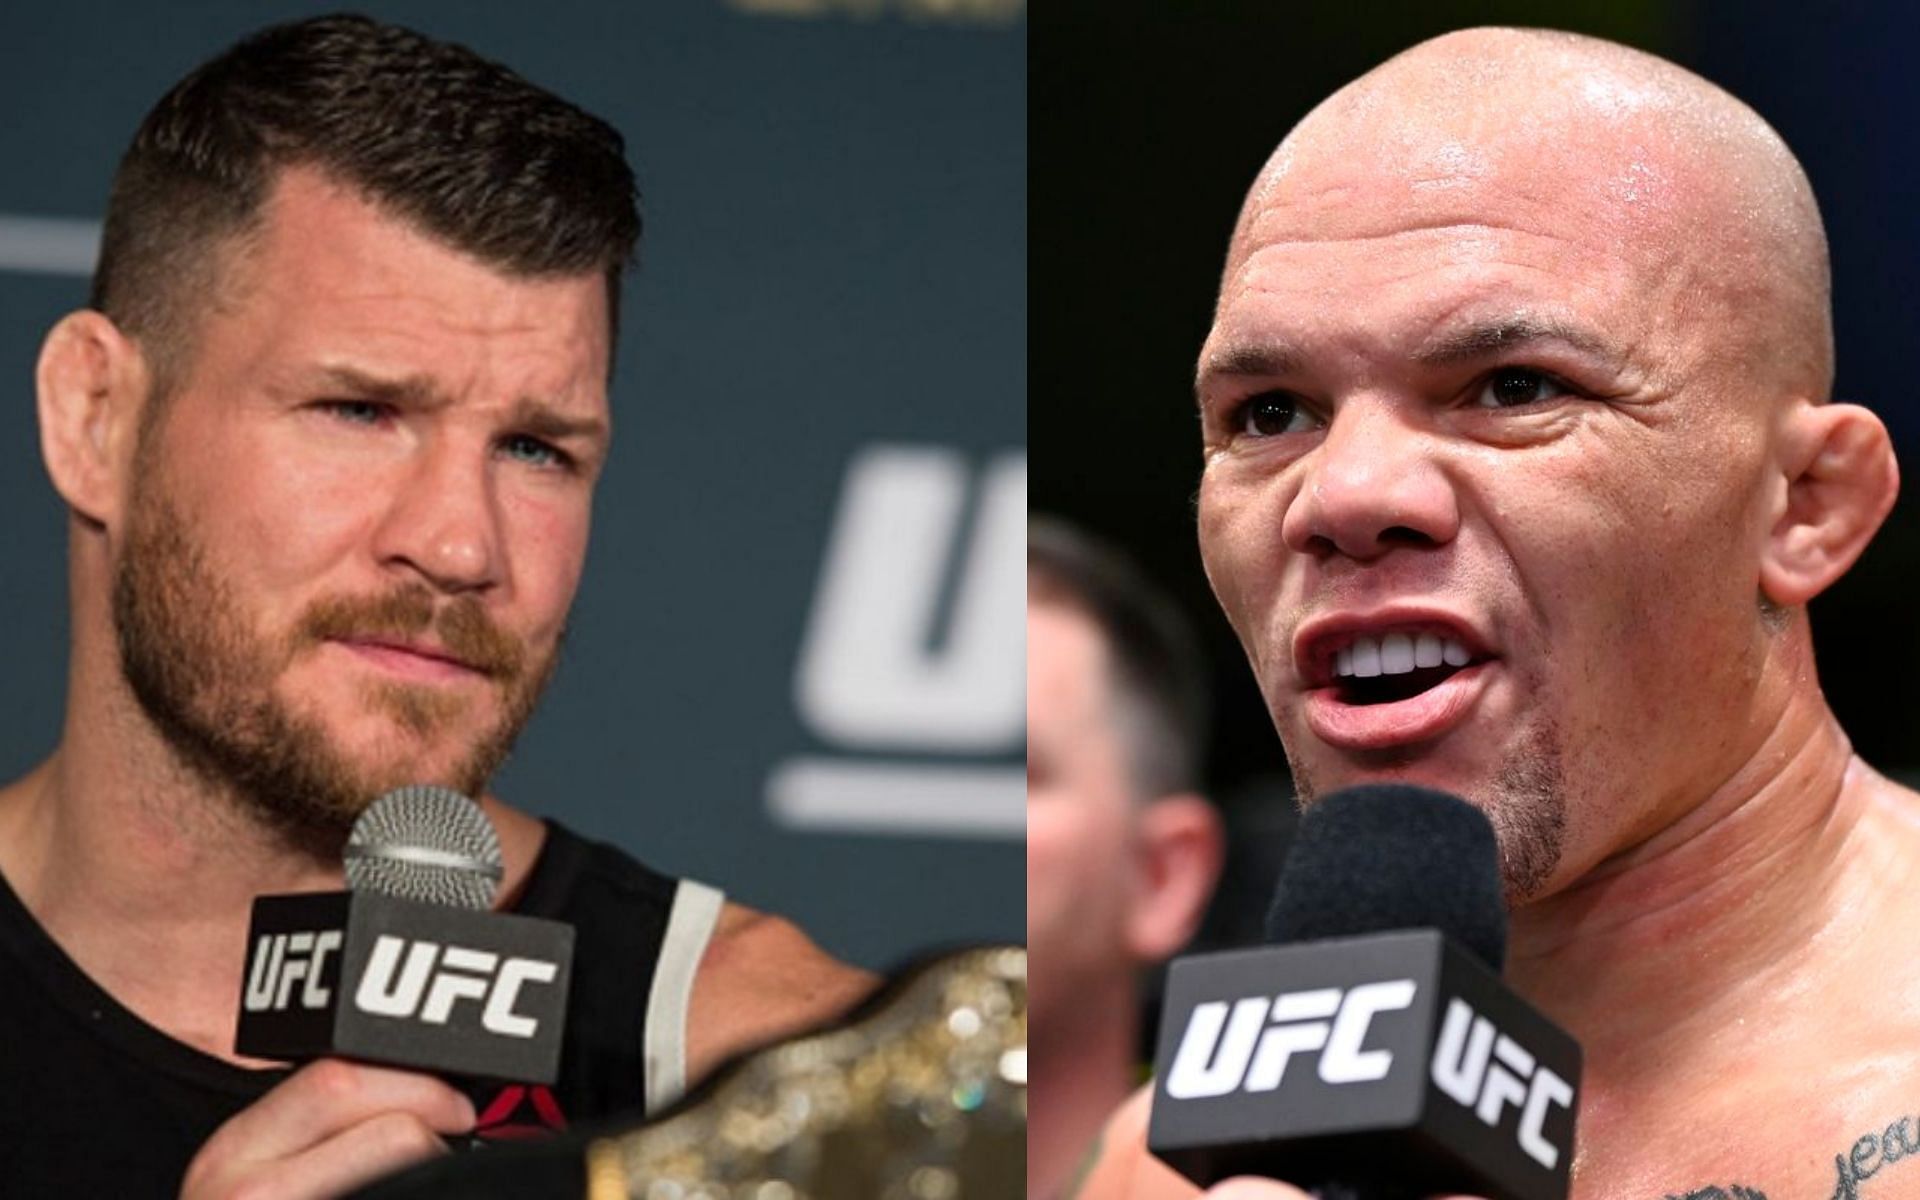 Michael Bisping (L) and Anthony Smith (R) [Images Courtesy: Getty]